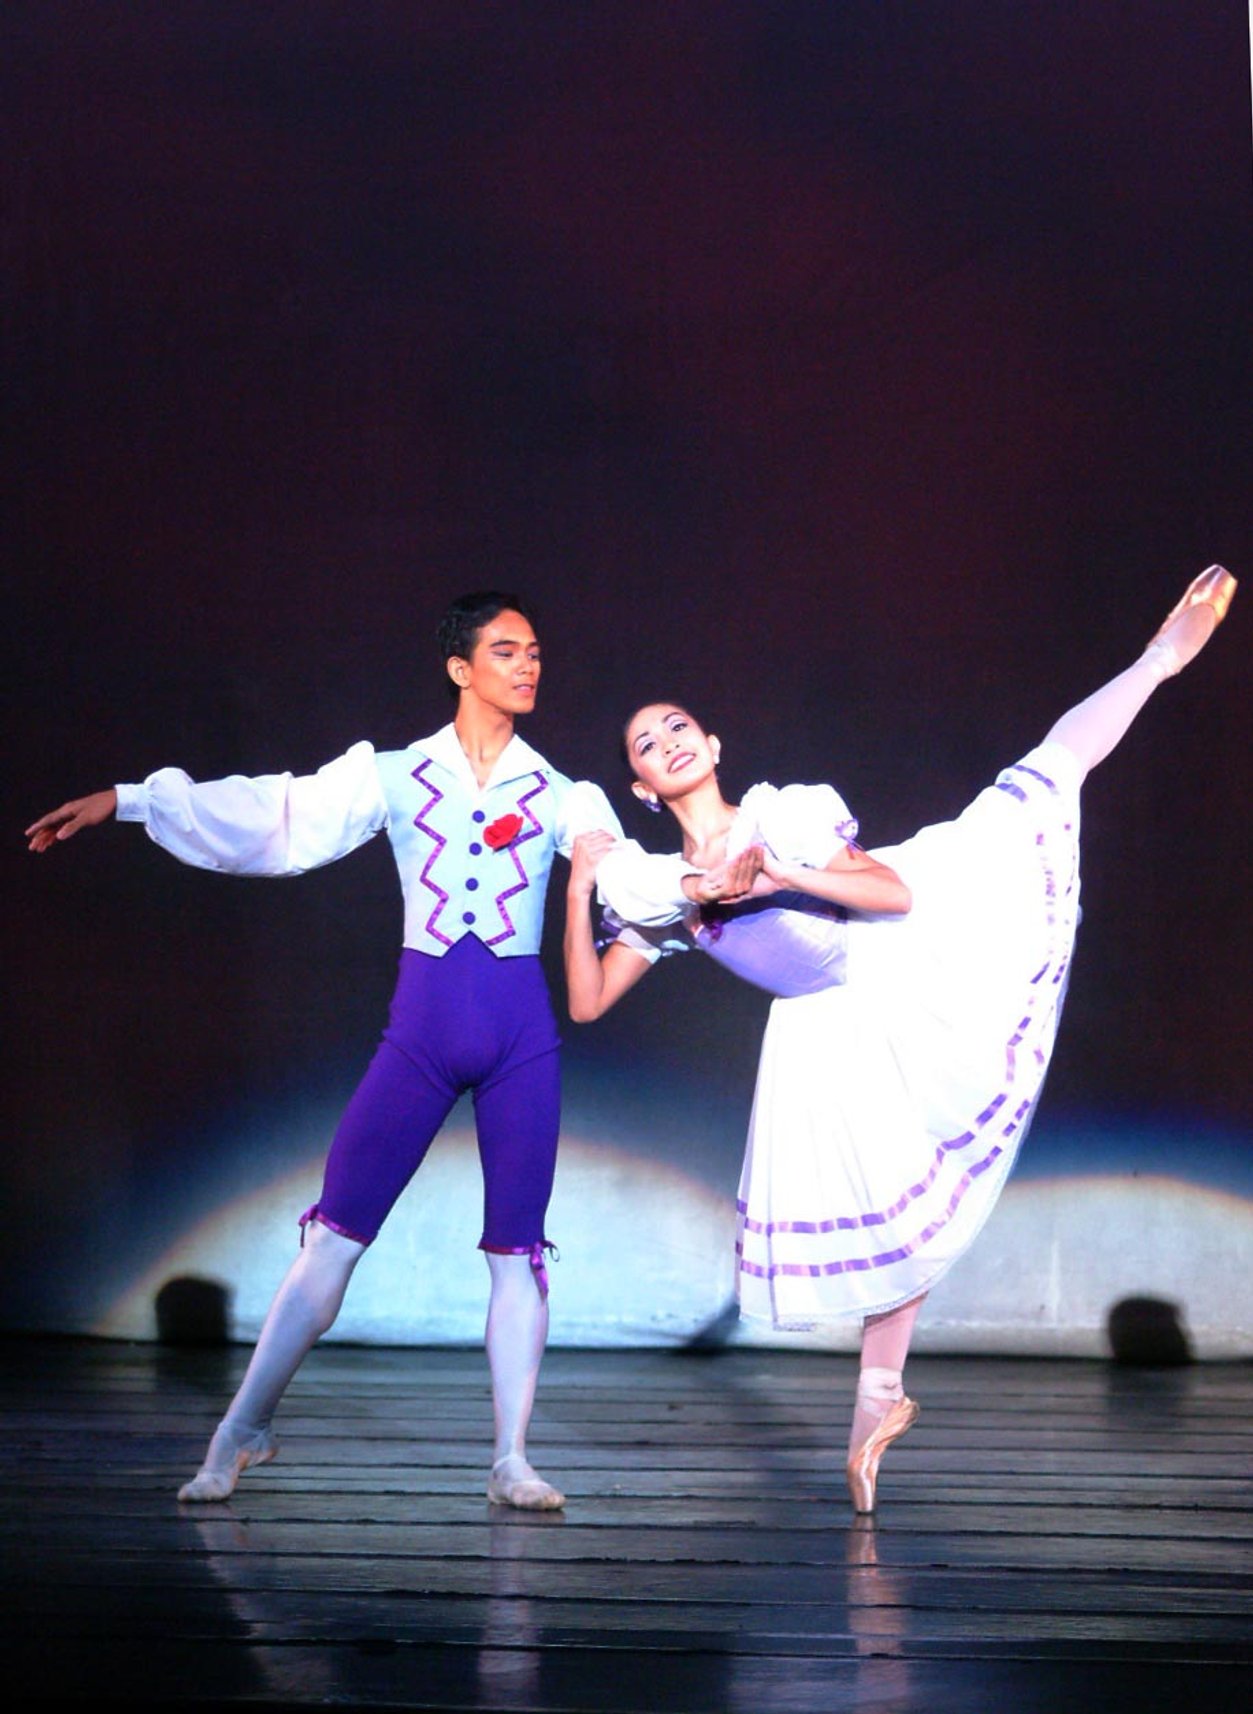    Ricardo Mallari and Marian Faustino make a purple pair in August Bournonville’s  Kermesse in Bruges  pas de deux. The duo performed the piece in  OPM at OPB  (2003) shortly after dancing it as participants in the New York International Ballet Comp